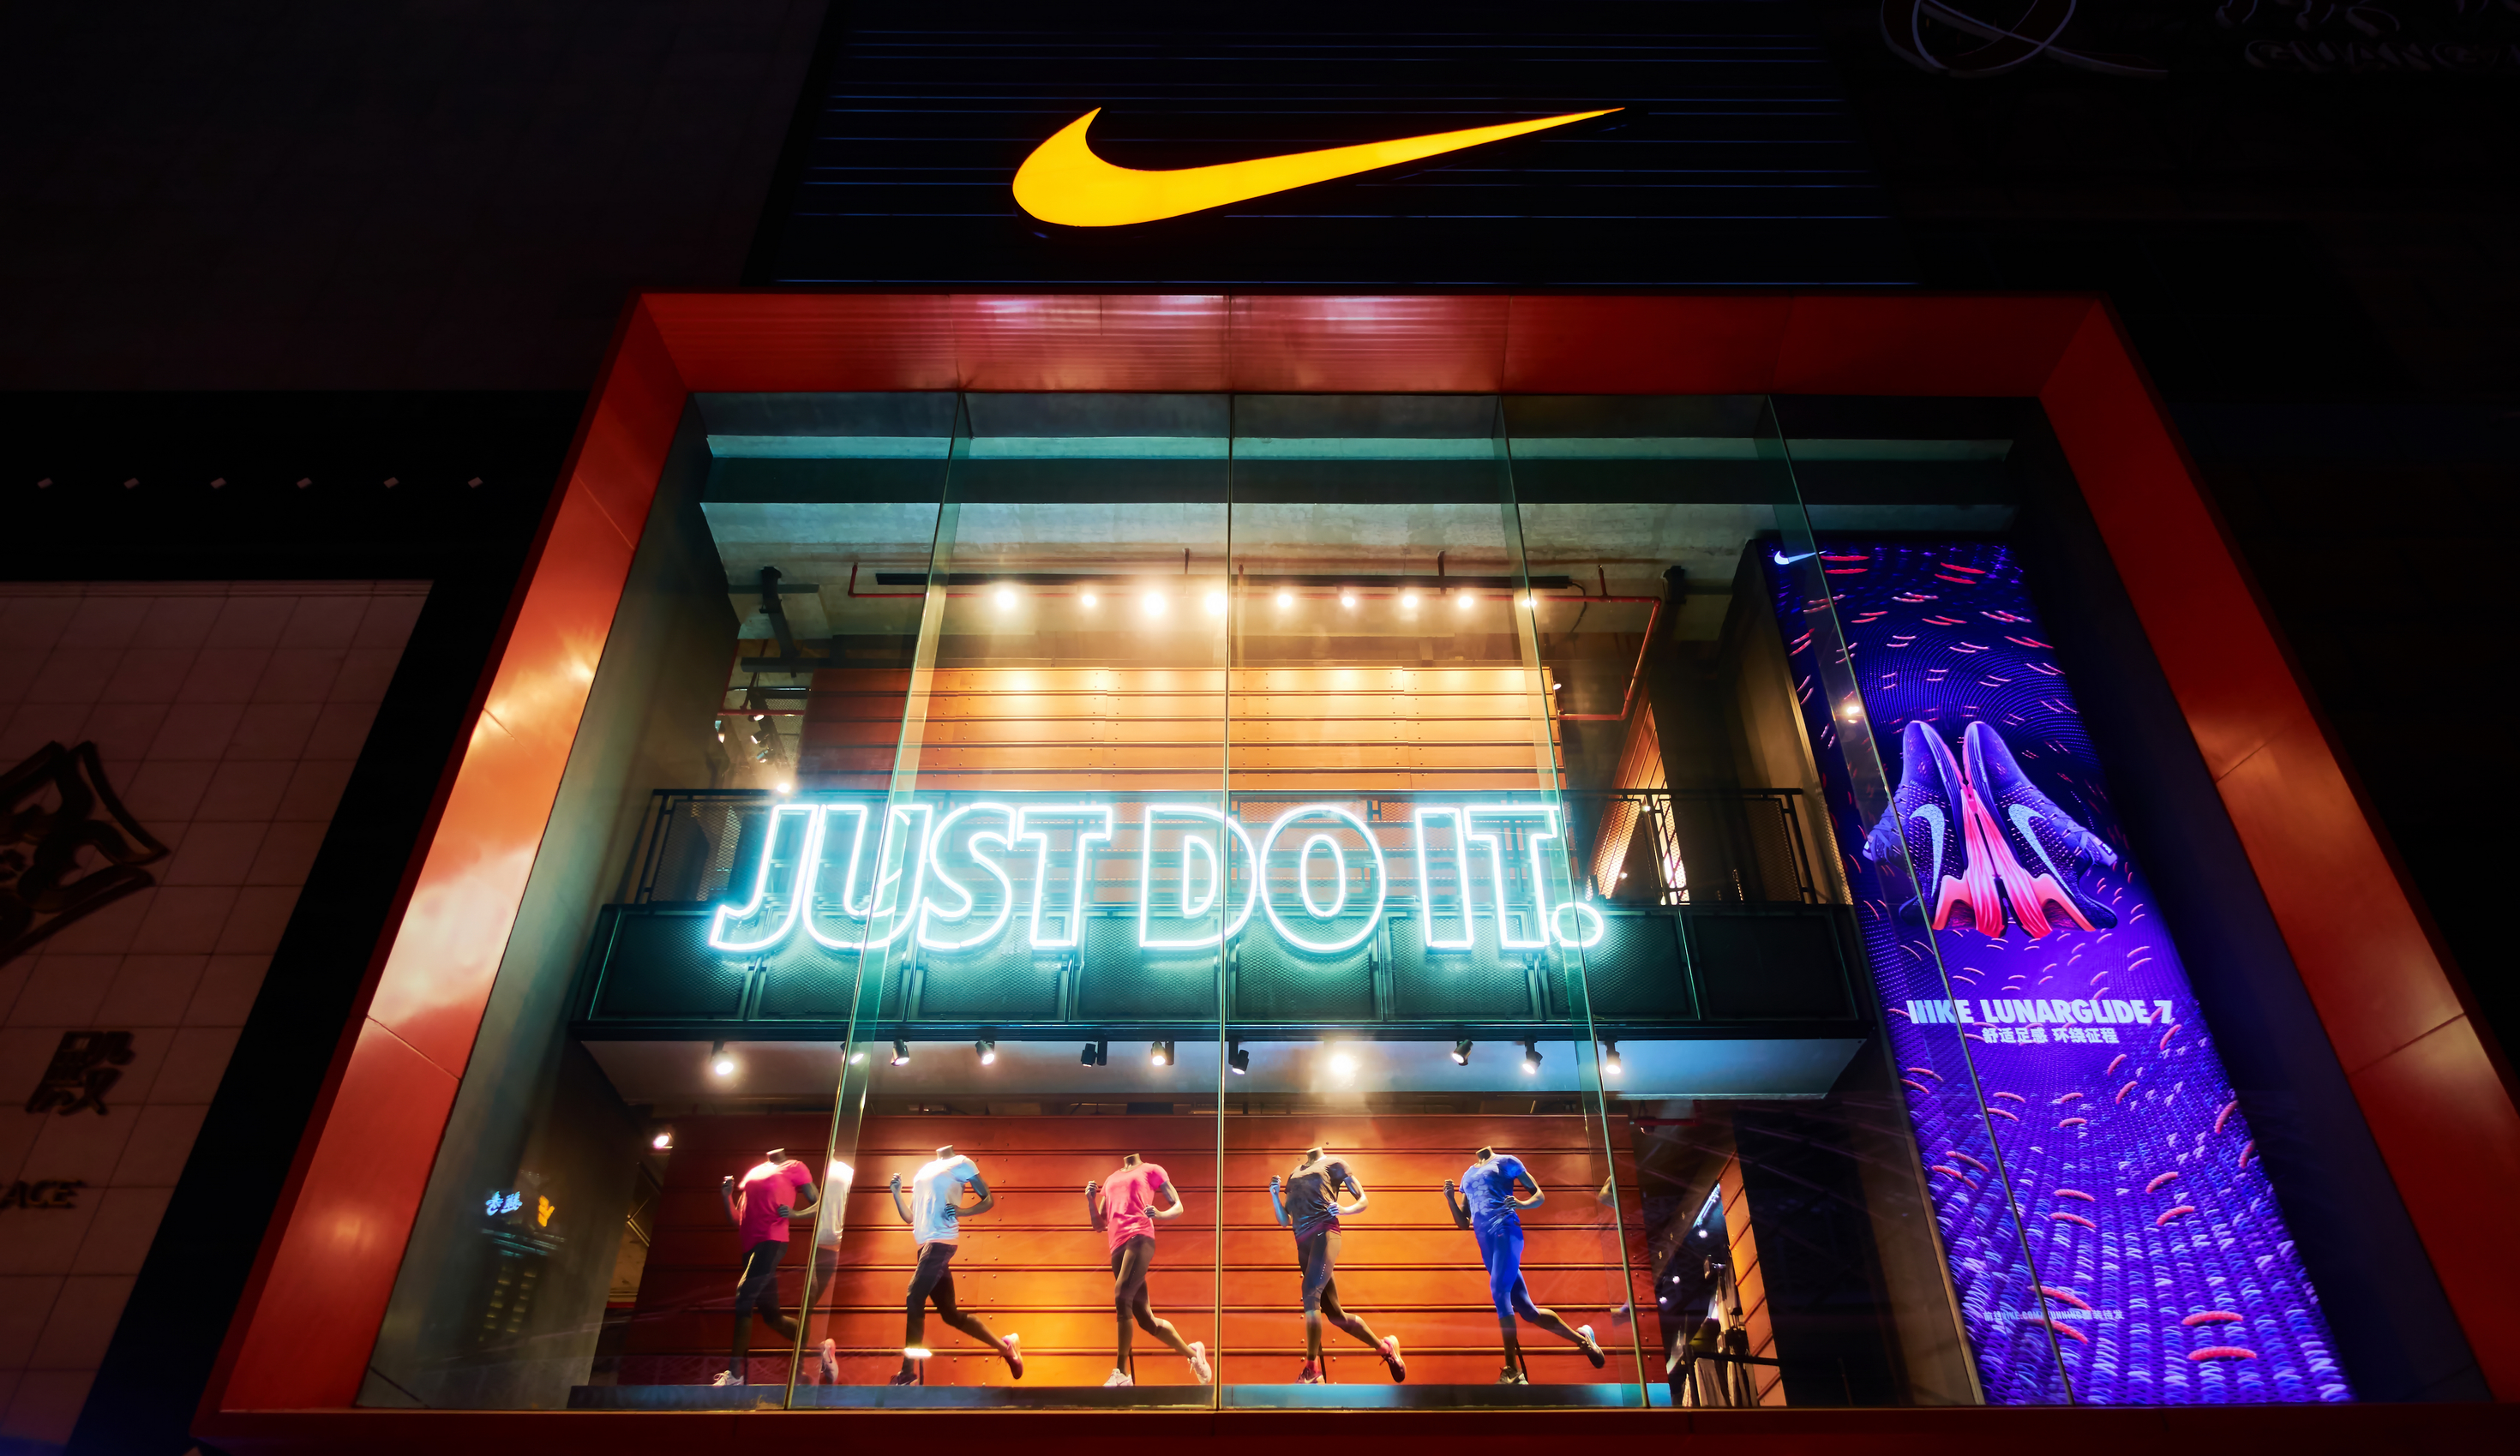 Nike promo codes: Save an extra 25% on select styles